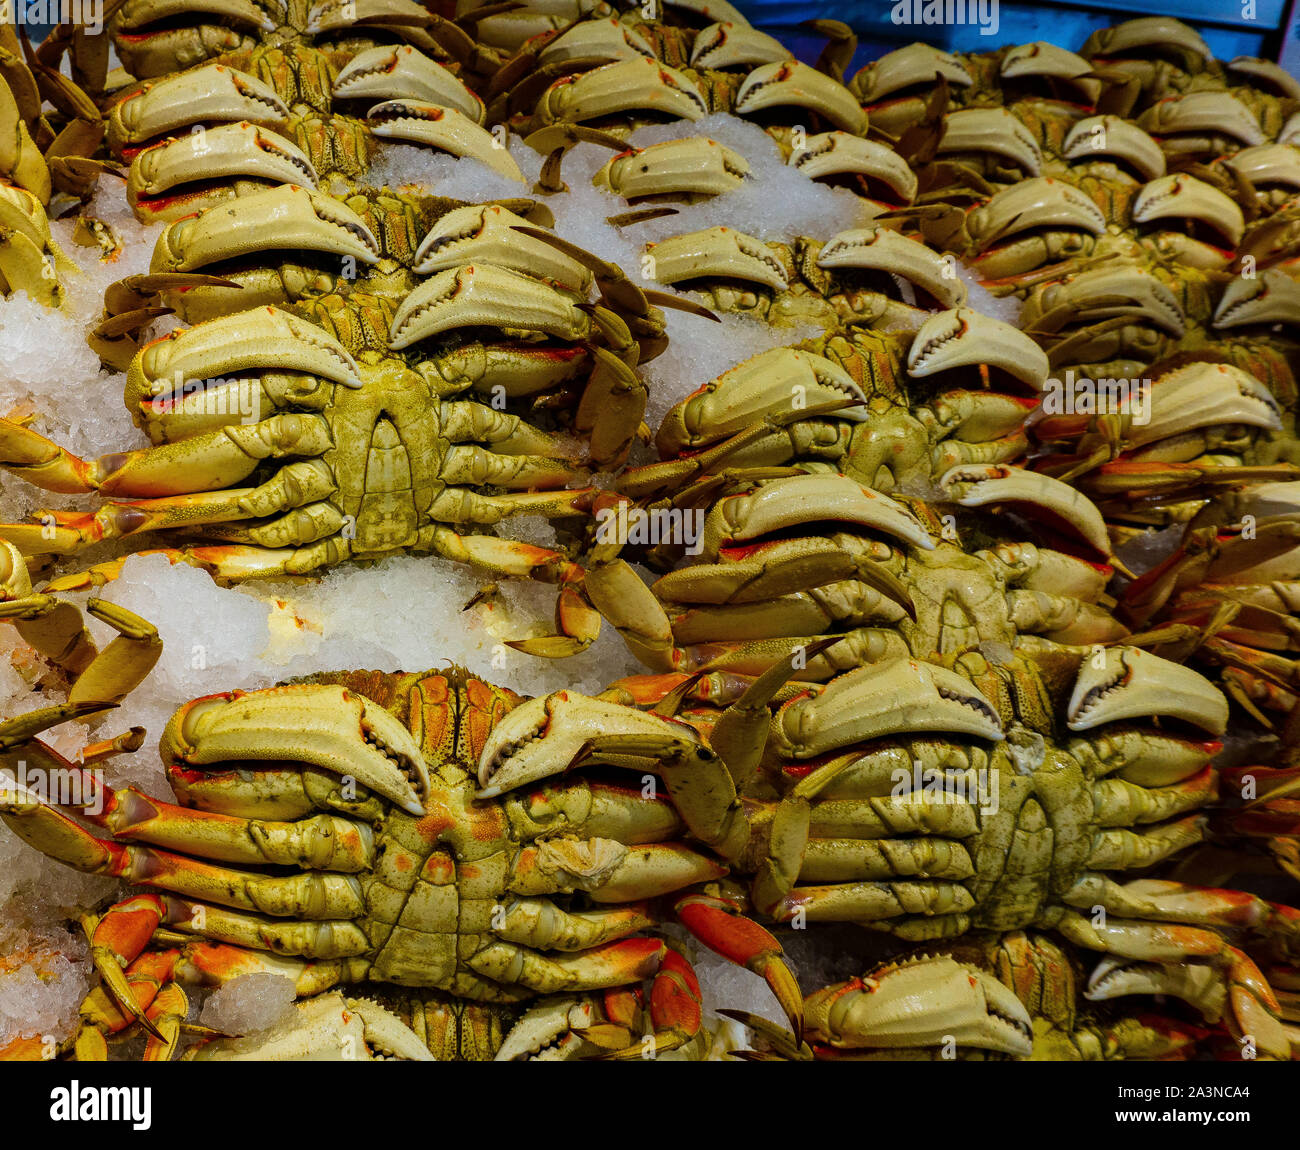 Alaskan crabs for sale at Pikes Place Market Stock Photo